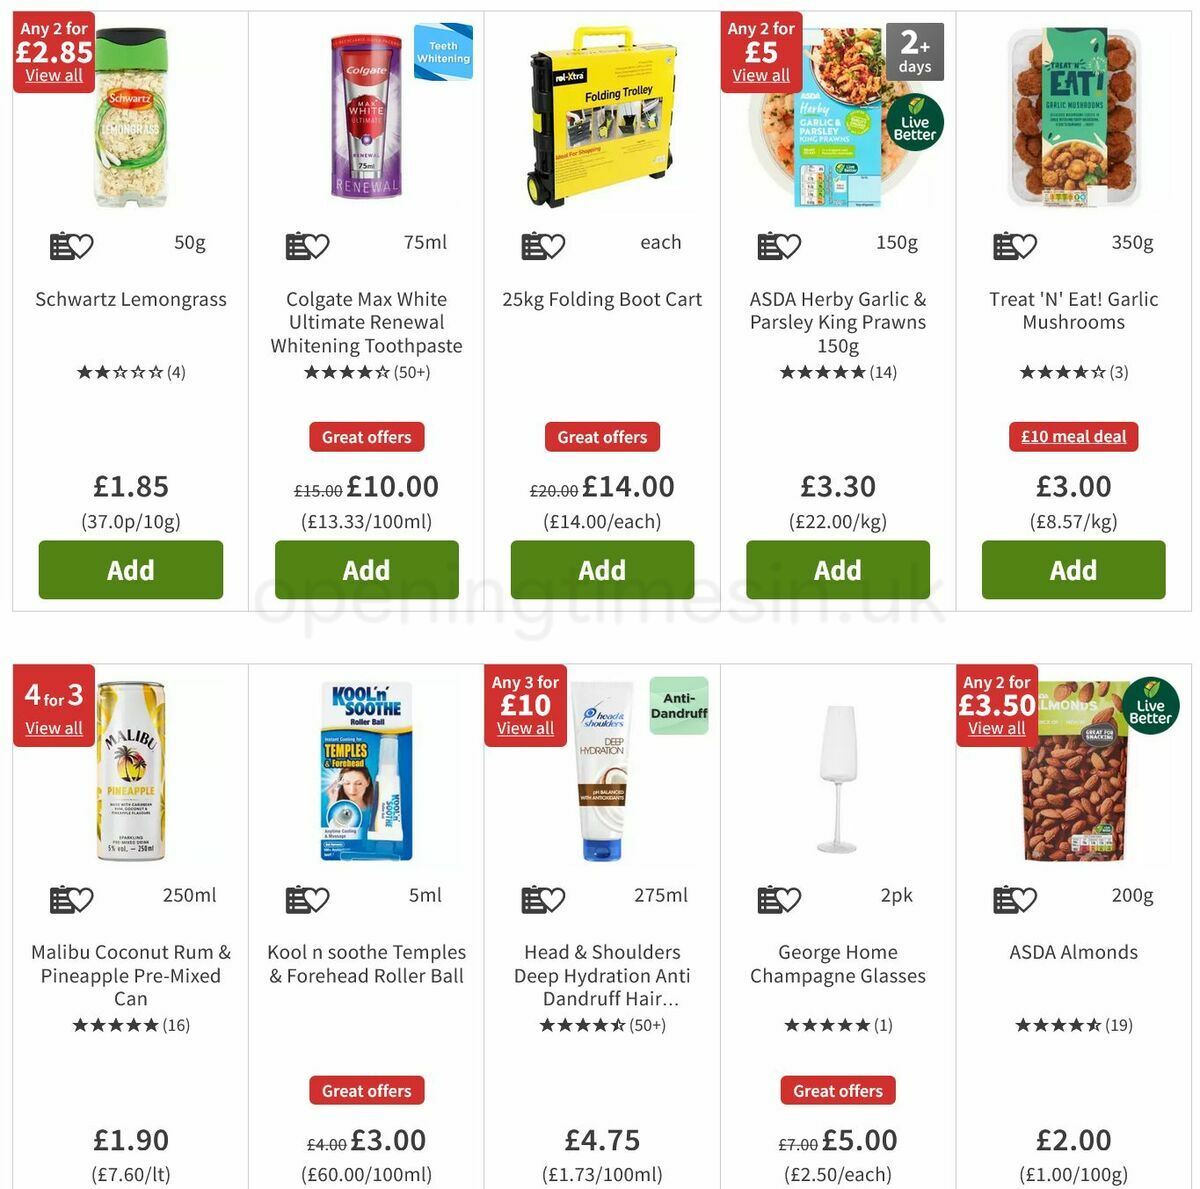 ASDA Offers from 25 November